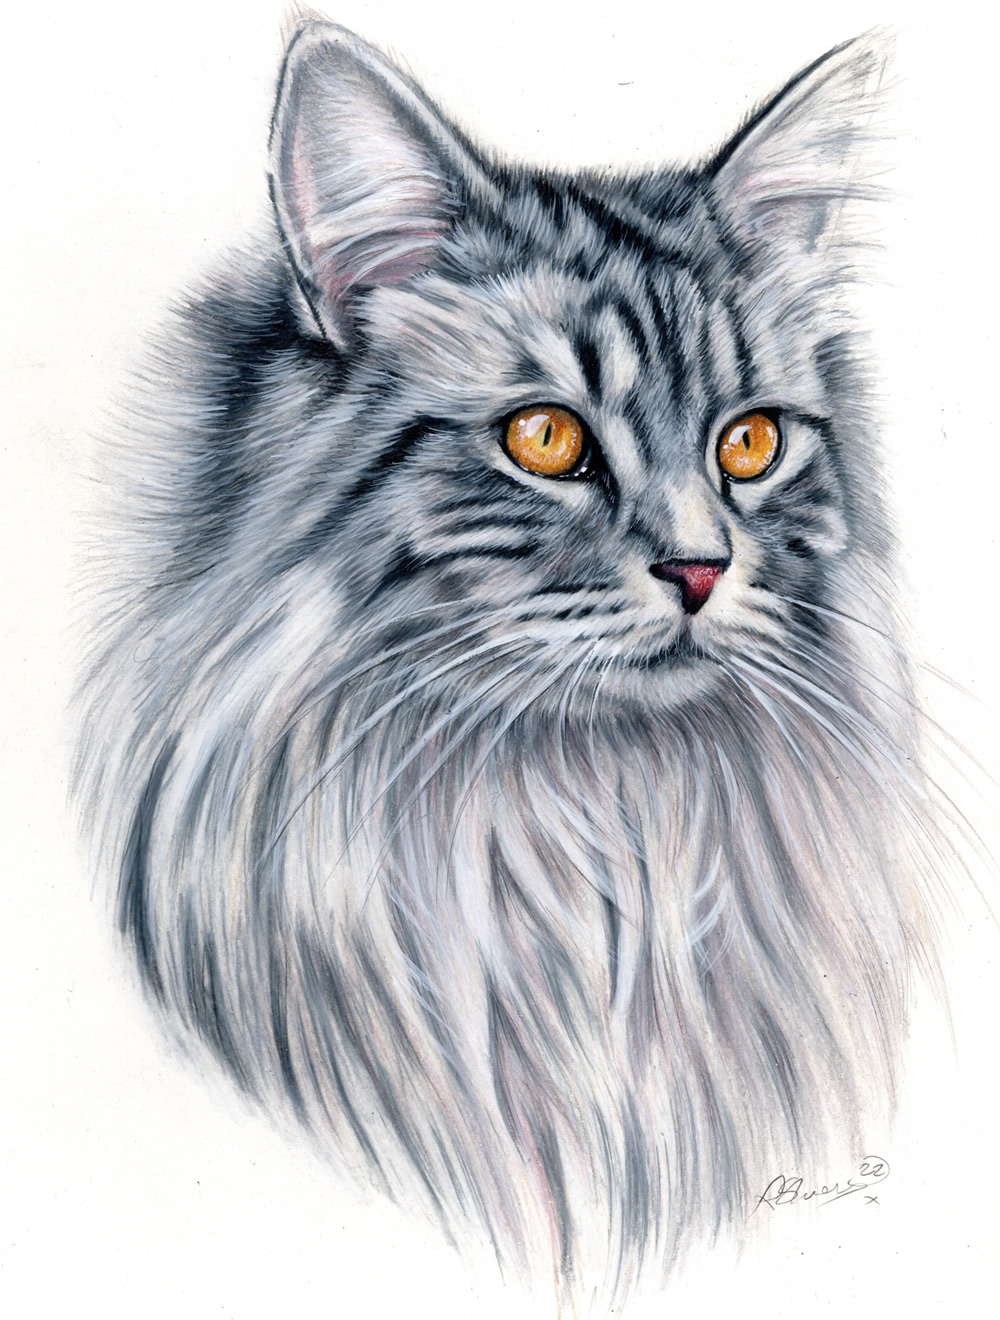 Done touching up my color pencil drawing of my sisters pet cat. Going to be  entering into a contest Thursday! Hoping it does well. - 9GAG